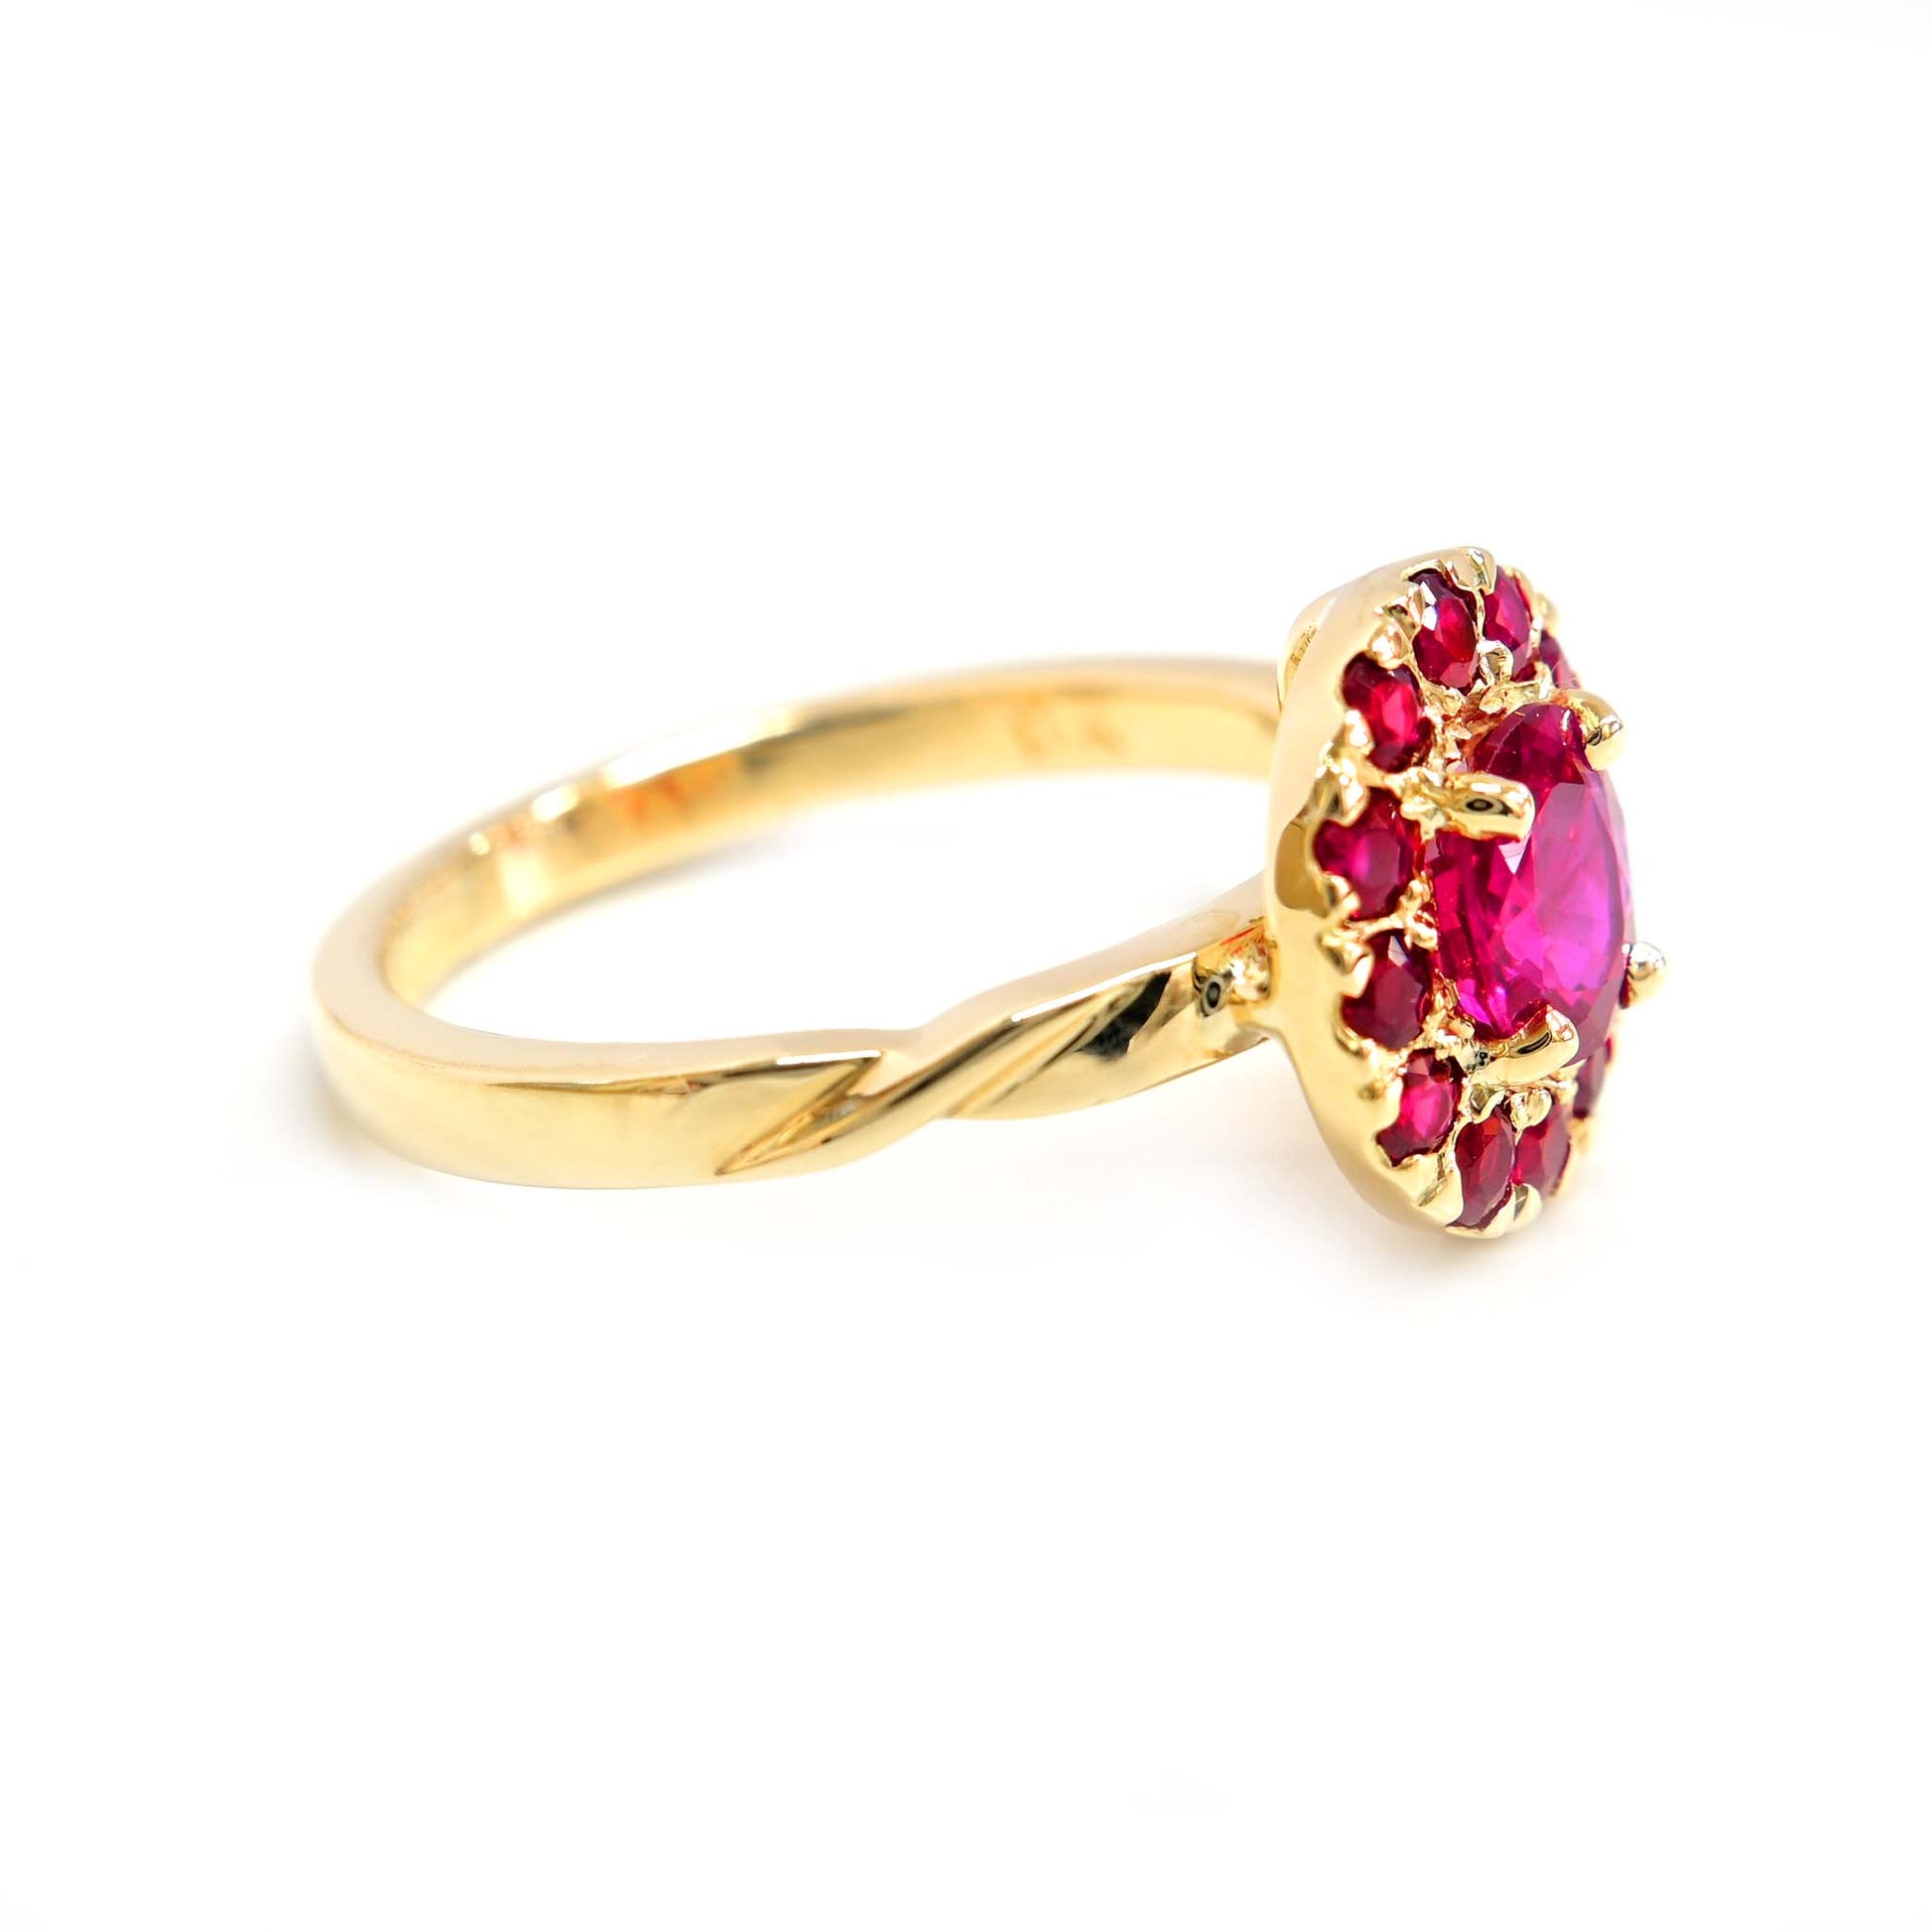 Eye-catching ruby ring with a radiant halo, perfect for special occasions